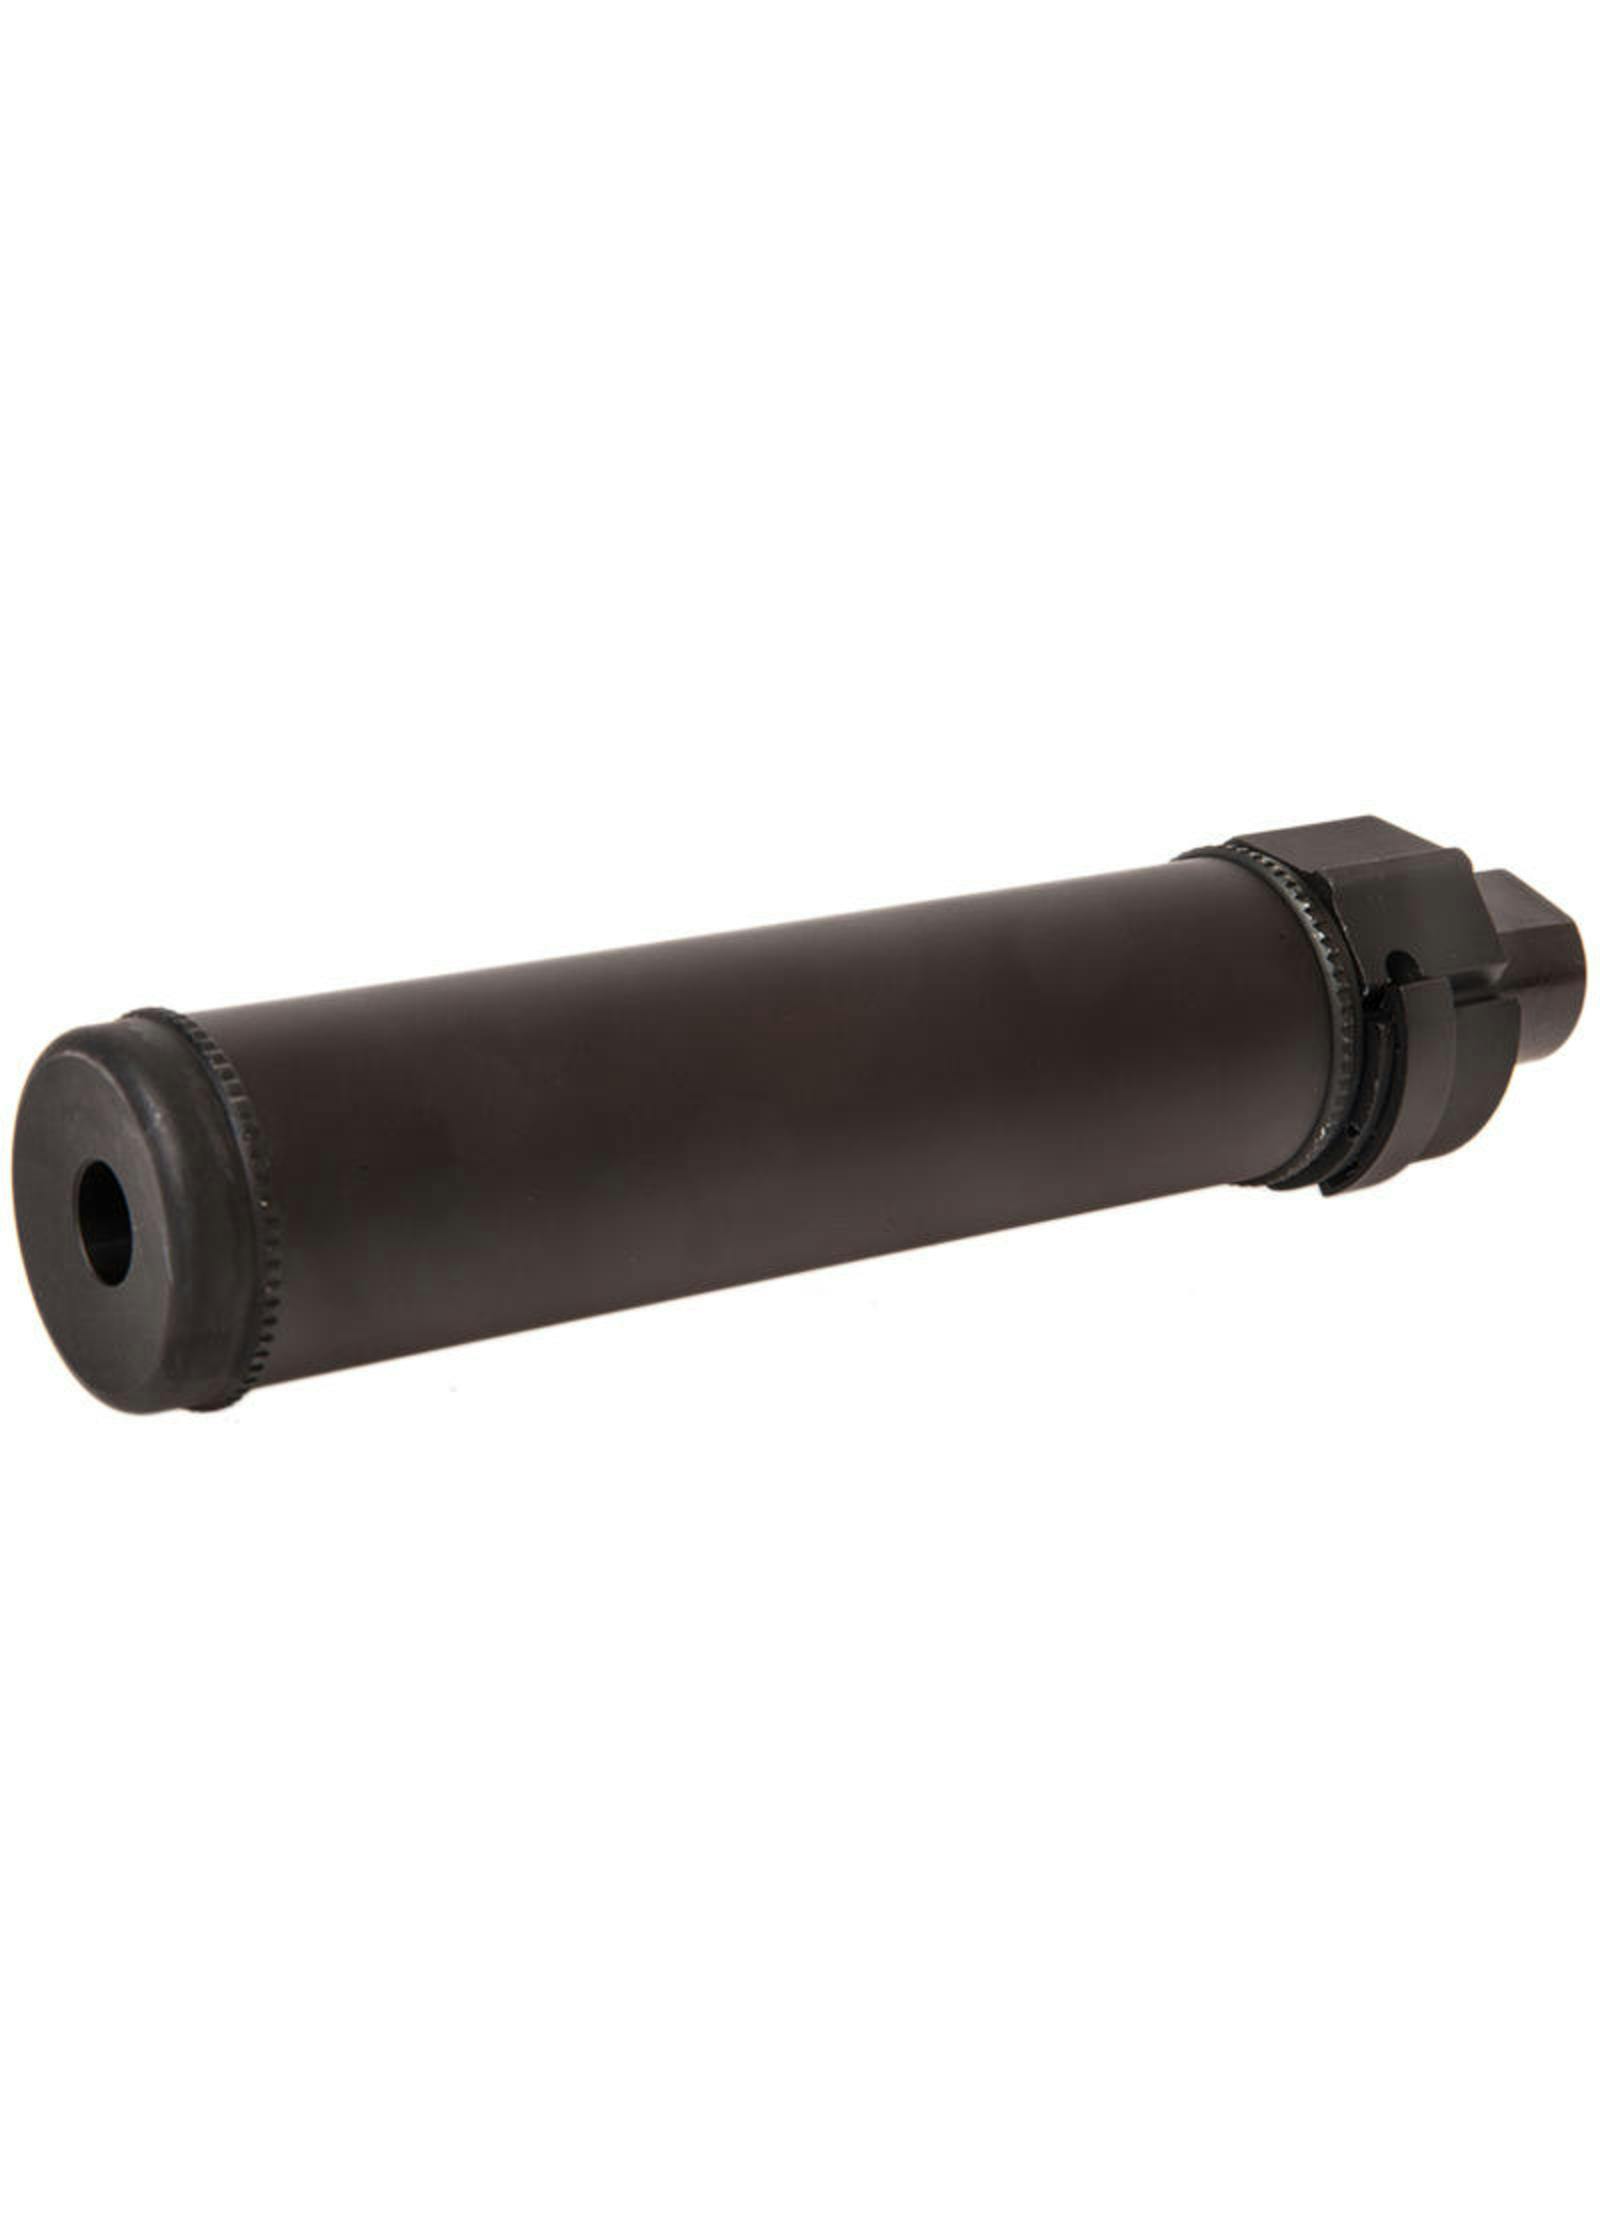 Nuprol BOCCA BOA QD Barrel Extension Long With Flash Hider 170mm Airsoft Toy 